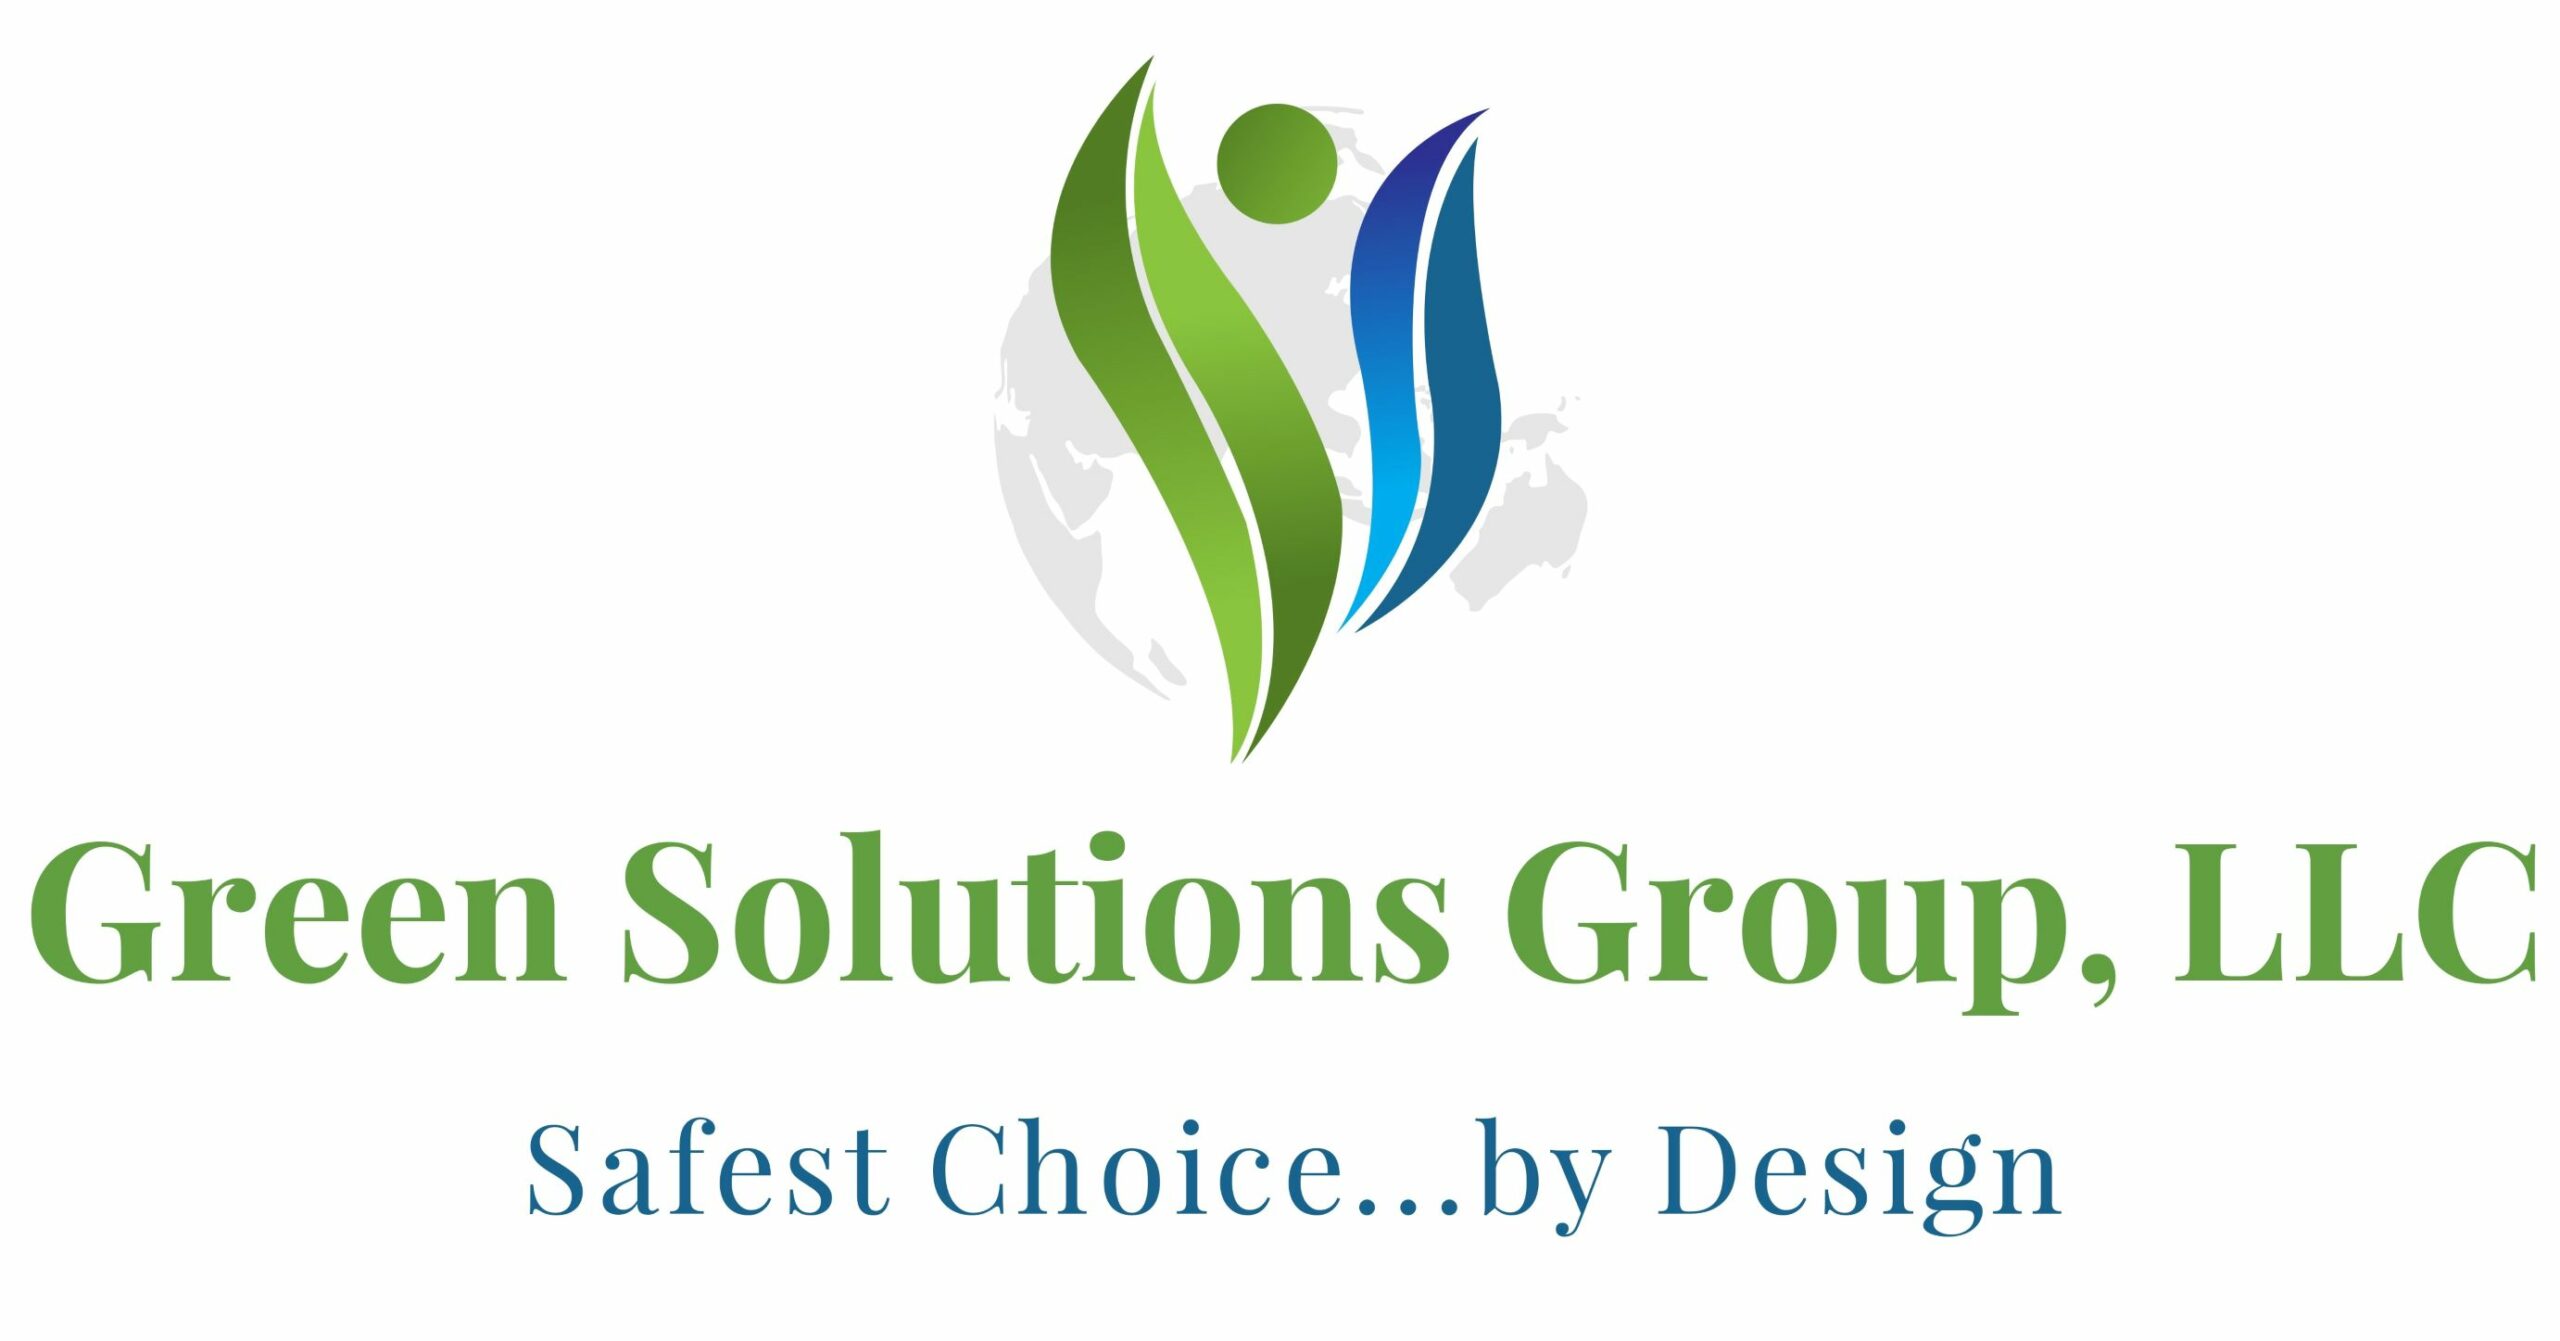 Green Solutions Group : Brand Short Description Type Here.